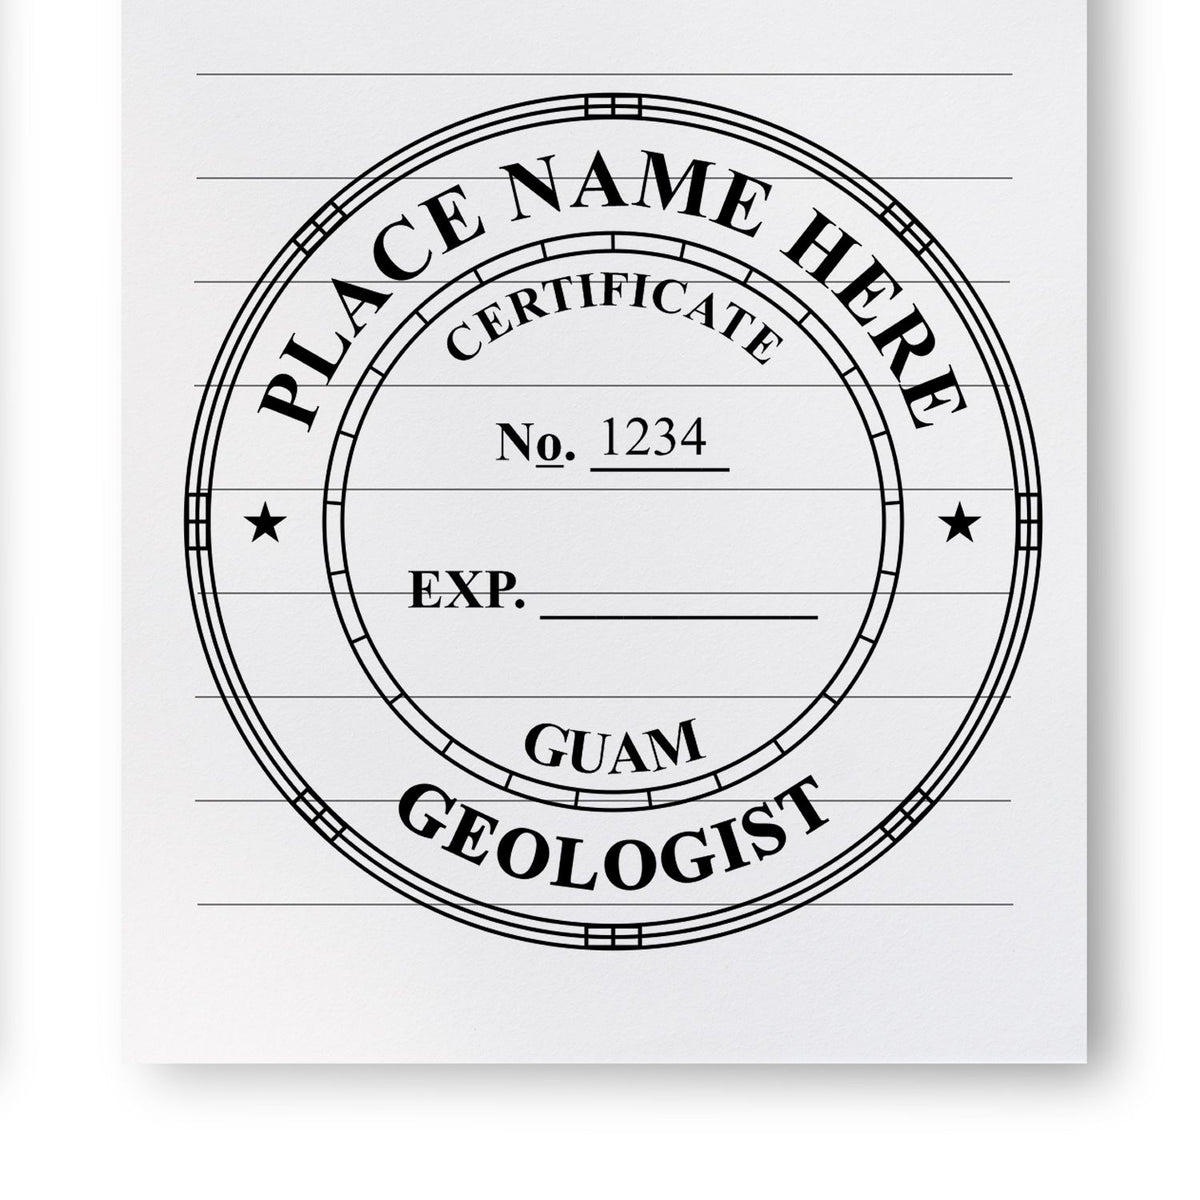 The Guam Professional Geologist Seal Stamp stamp impression comes to life with a crisp, detailed image stamped on paper - showcasing true professional quality.